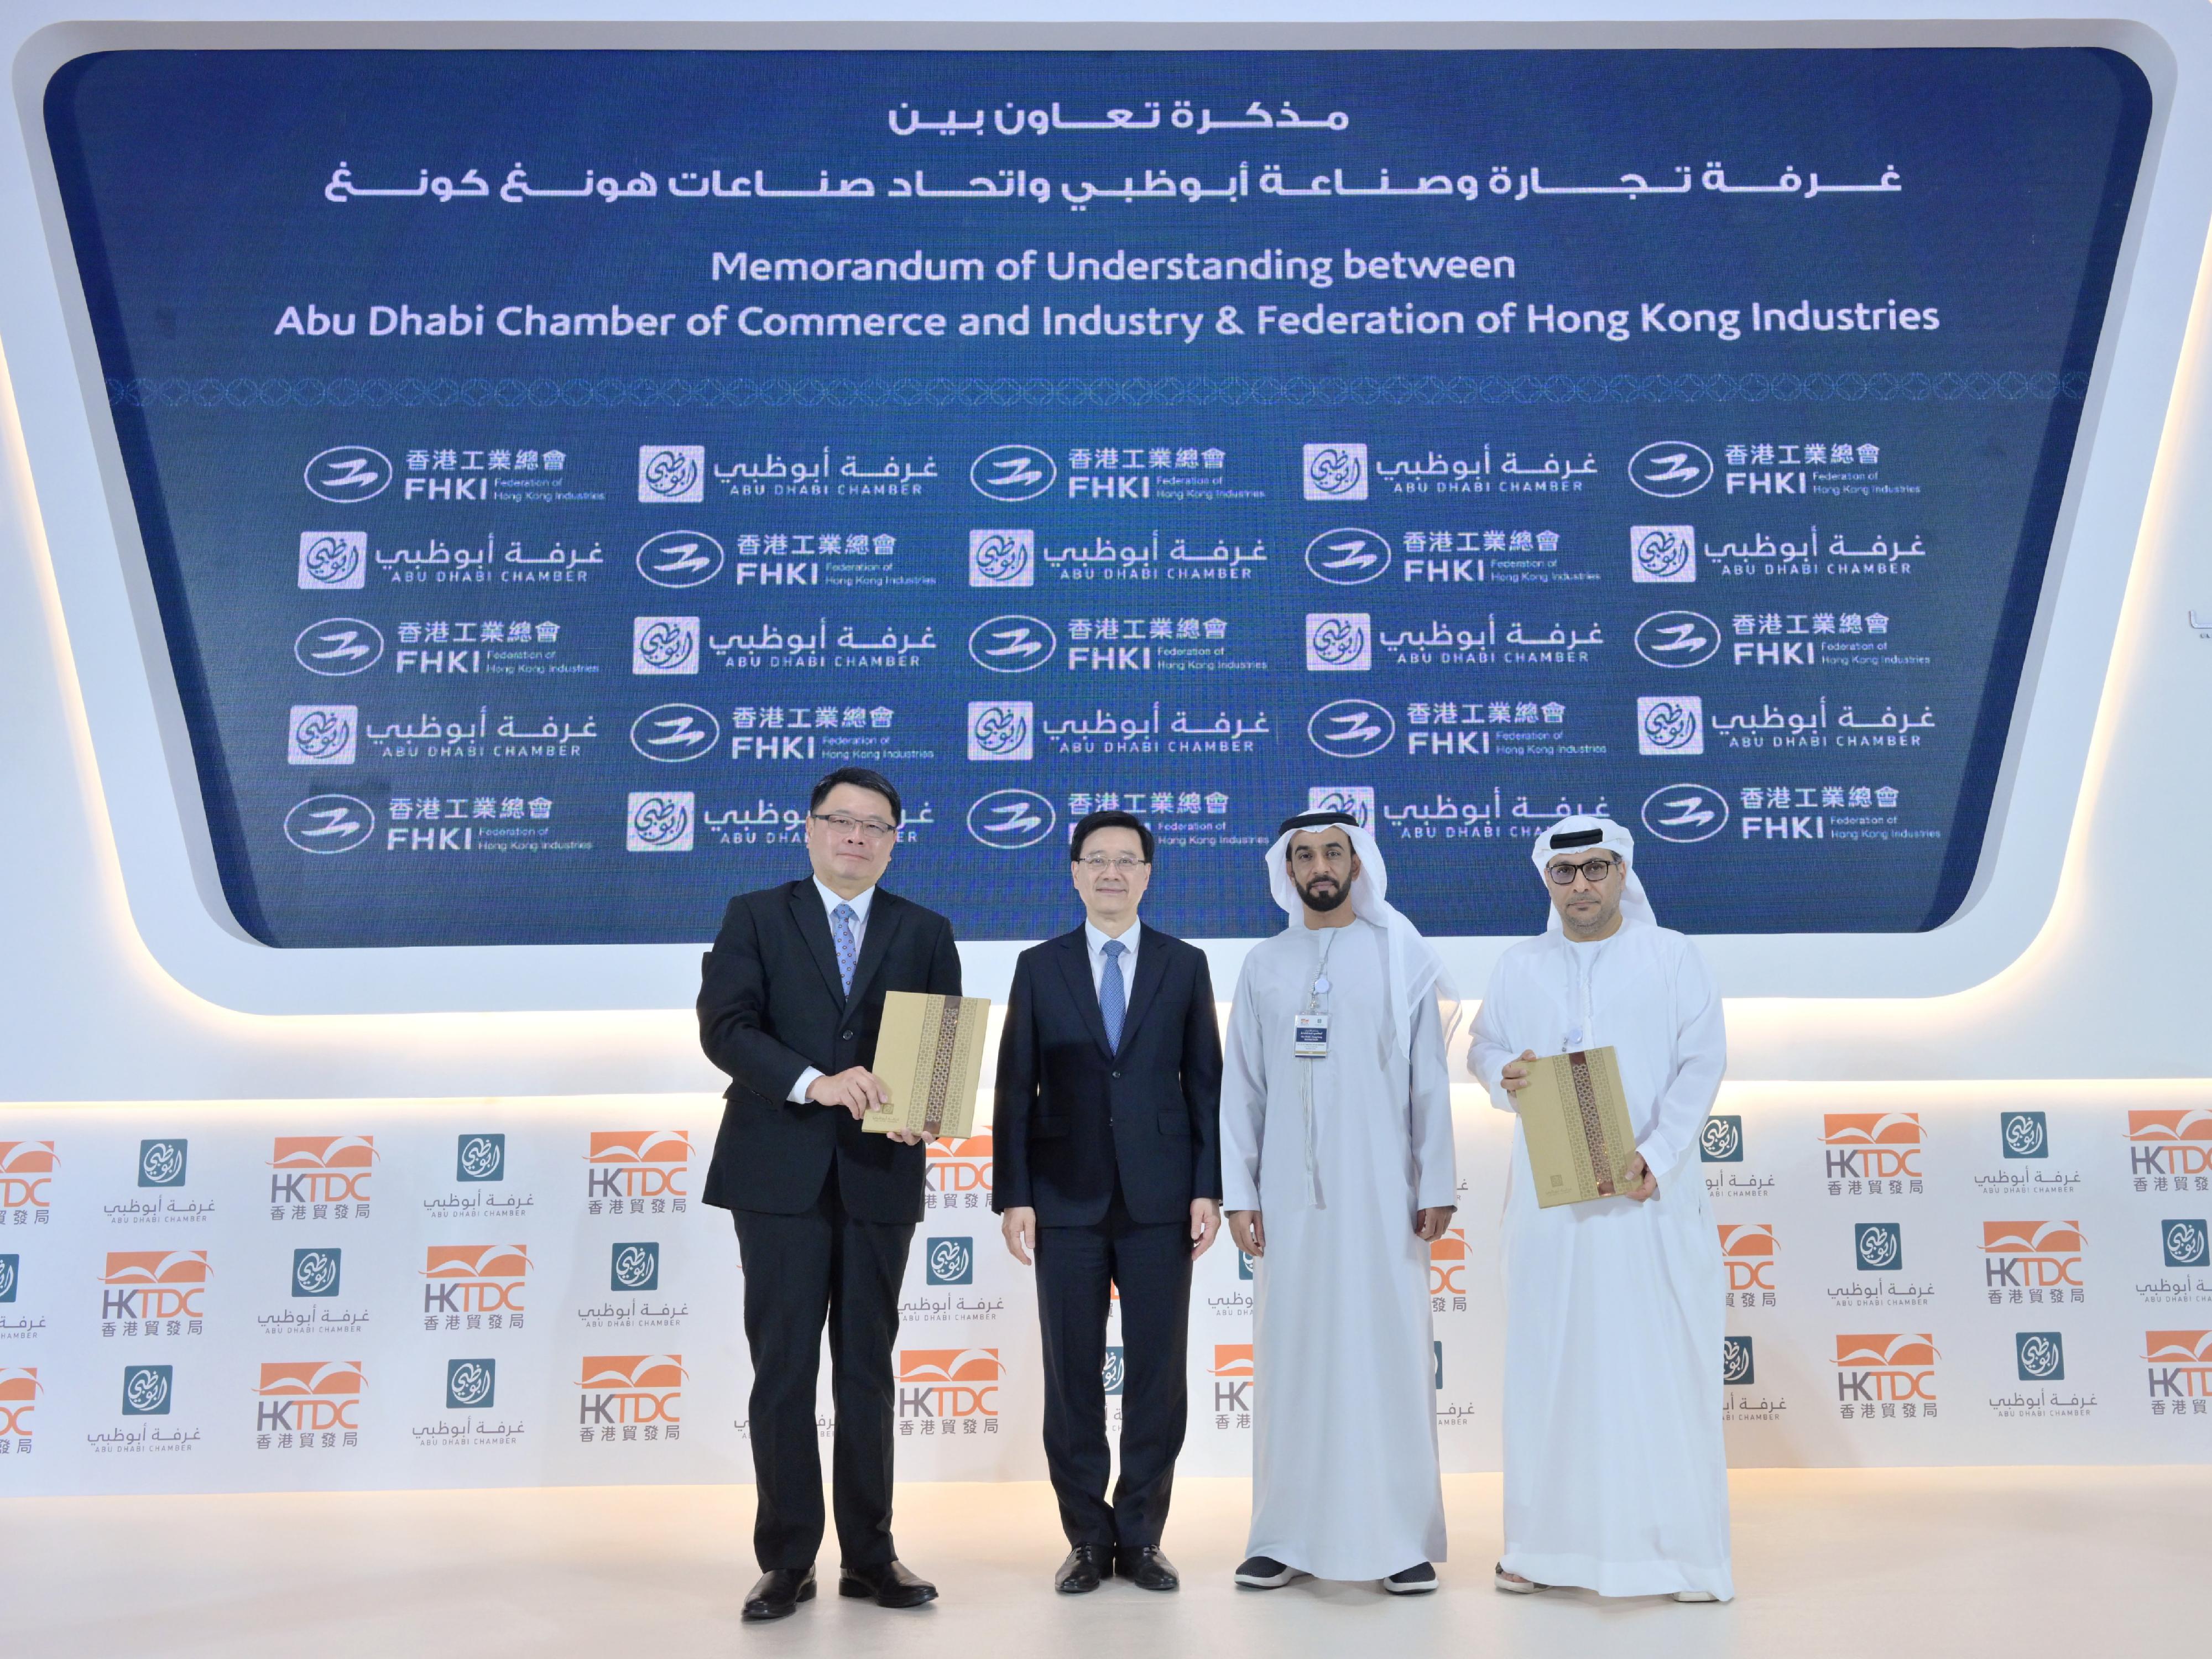 The Chief Executive, Mr John Lee, today (February 7, Abu Dhabi time) attended the Abu Dhabi-Hong Kong Business Forum and networking luncheon hosted by the Abu Dhabi Chamber of Commerce and Industry in Abu Dhabi, the United Arab Emirates. Photo shows Mr Lee (second left) and the First Vice Chairman of the Abu Dhabi Chamber of Commerce and Industry, Dr Ali Saeed Bin Harmal Aldhaheri (second right), witnessing the exchange of Memorandum of Understanding between the Federation of Hong Kong Industries and the Abu Dhabi Chamber of Commerce and Industry.
